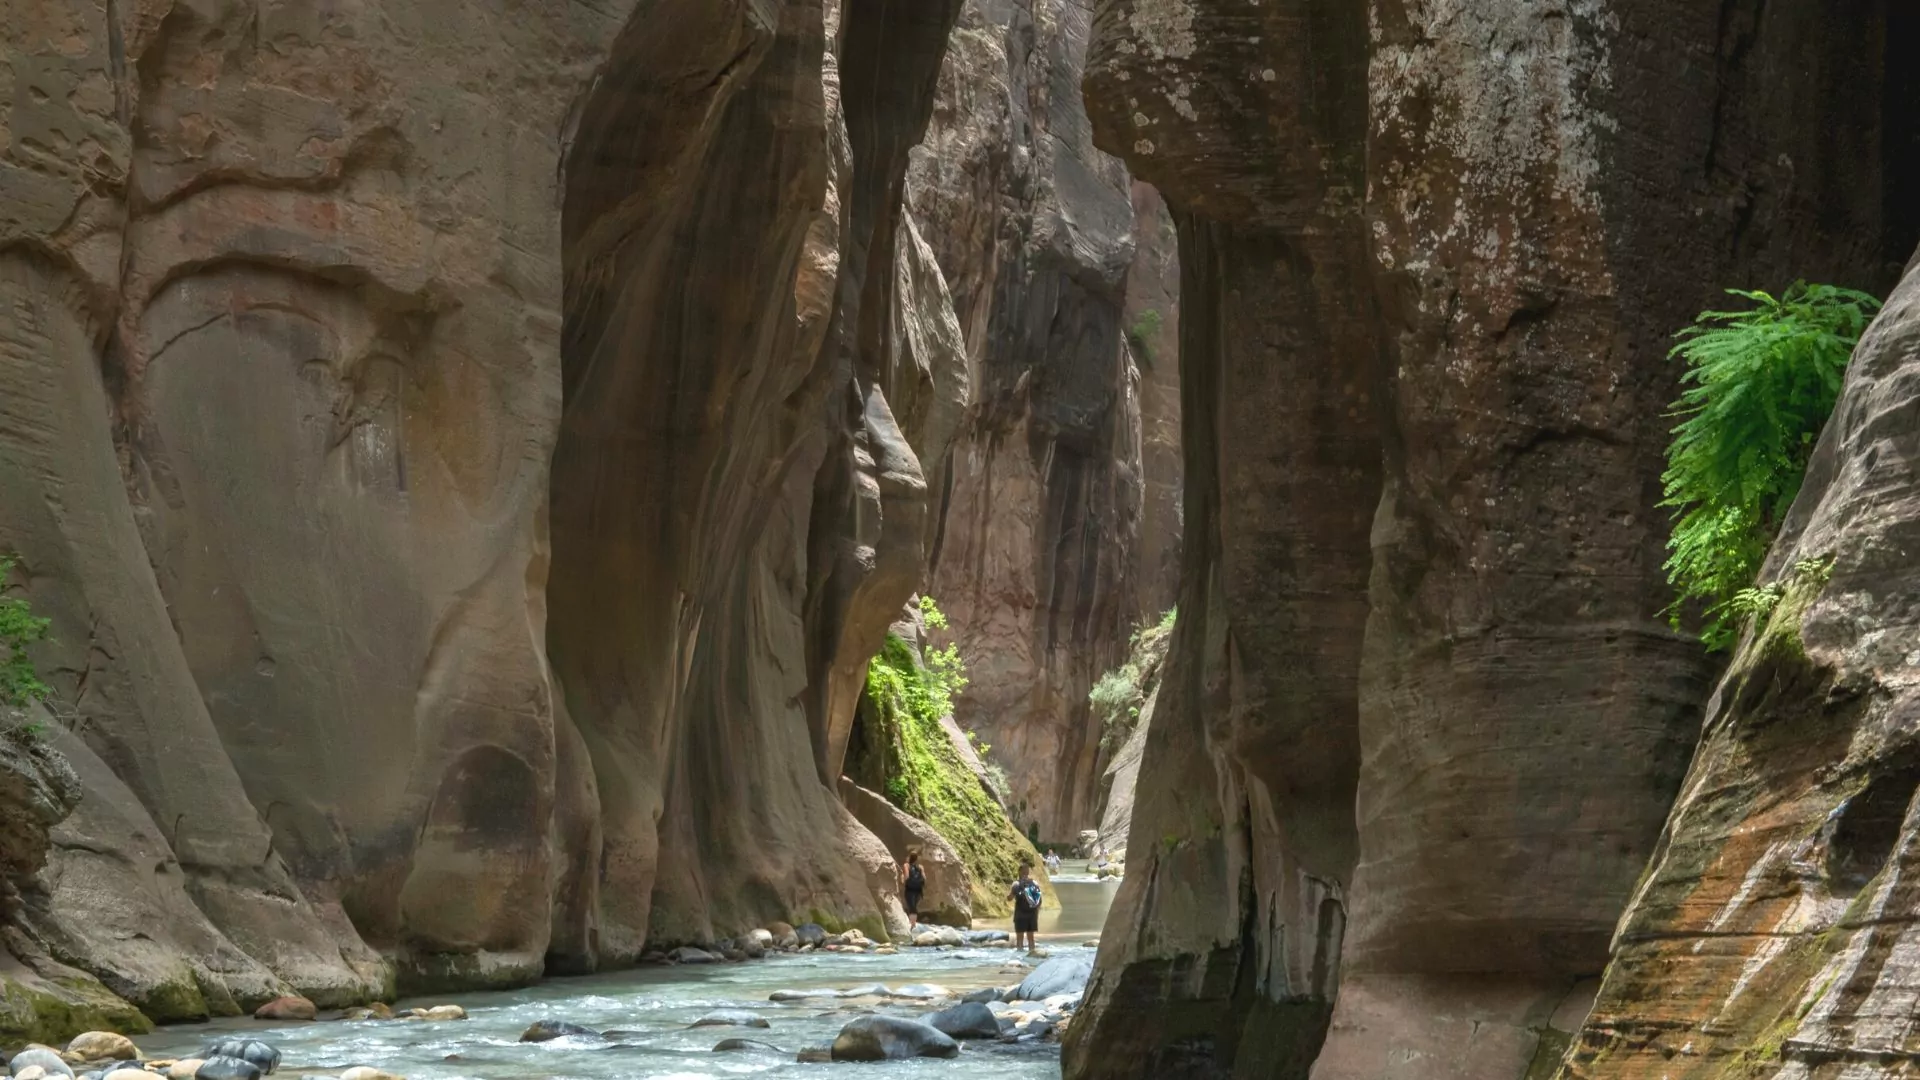 Hikers walk through water between imposing canyons walls to emerge from shade into the sun